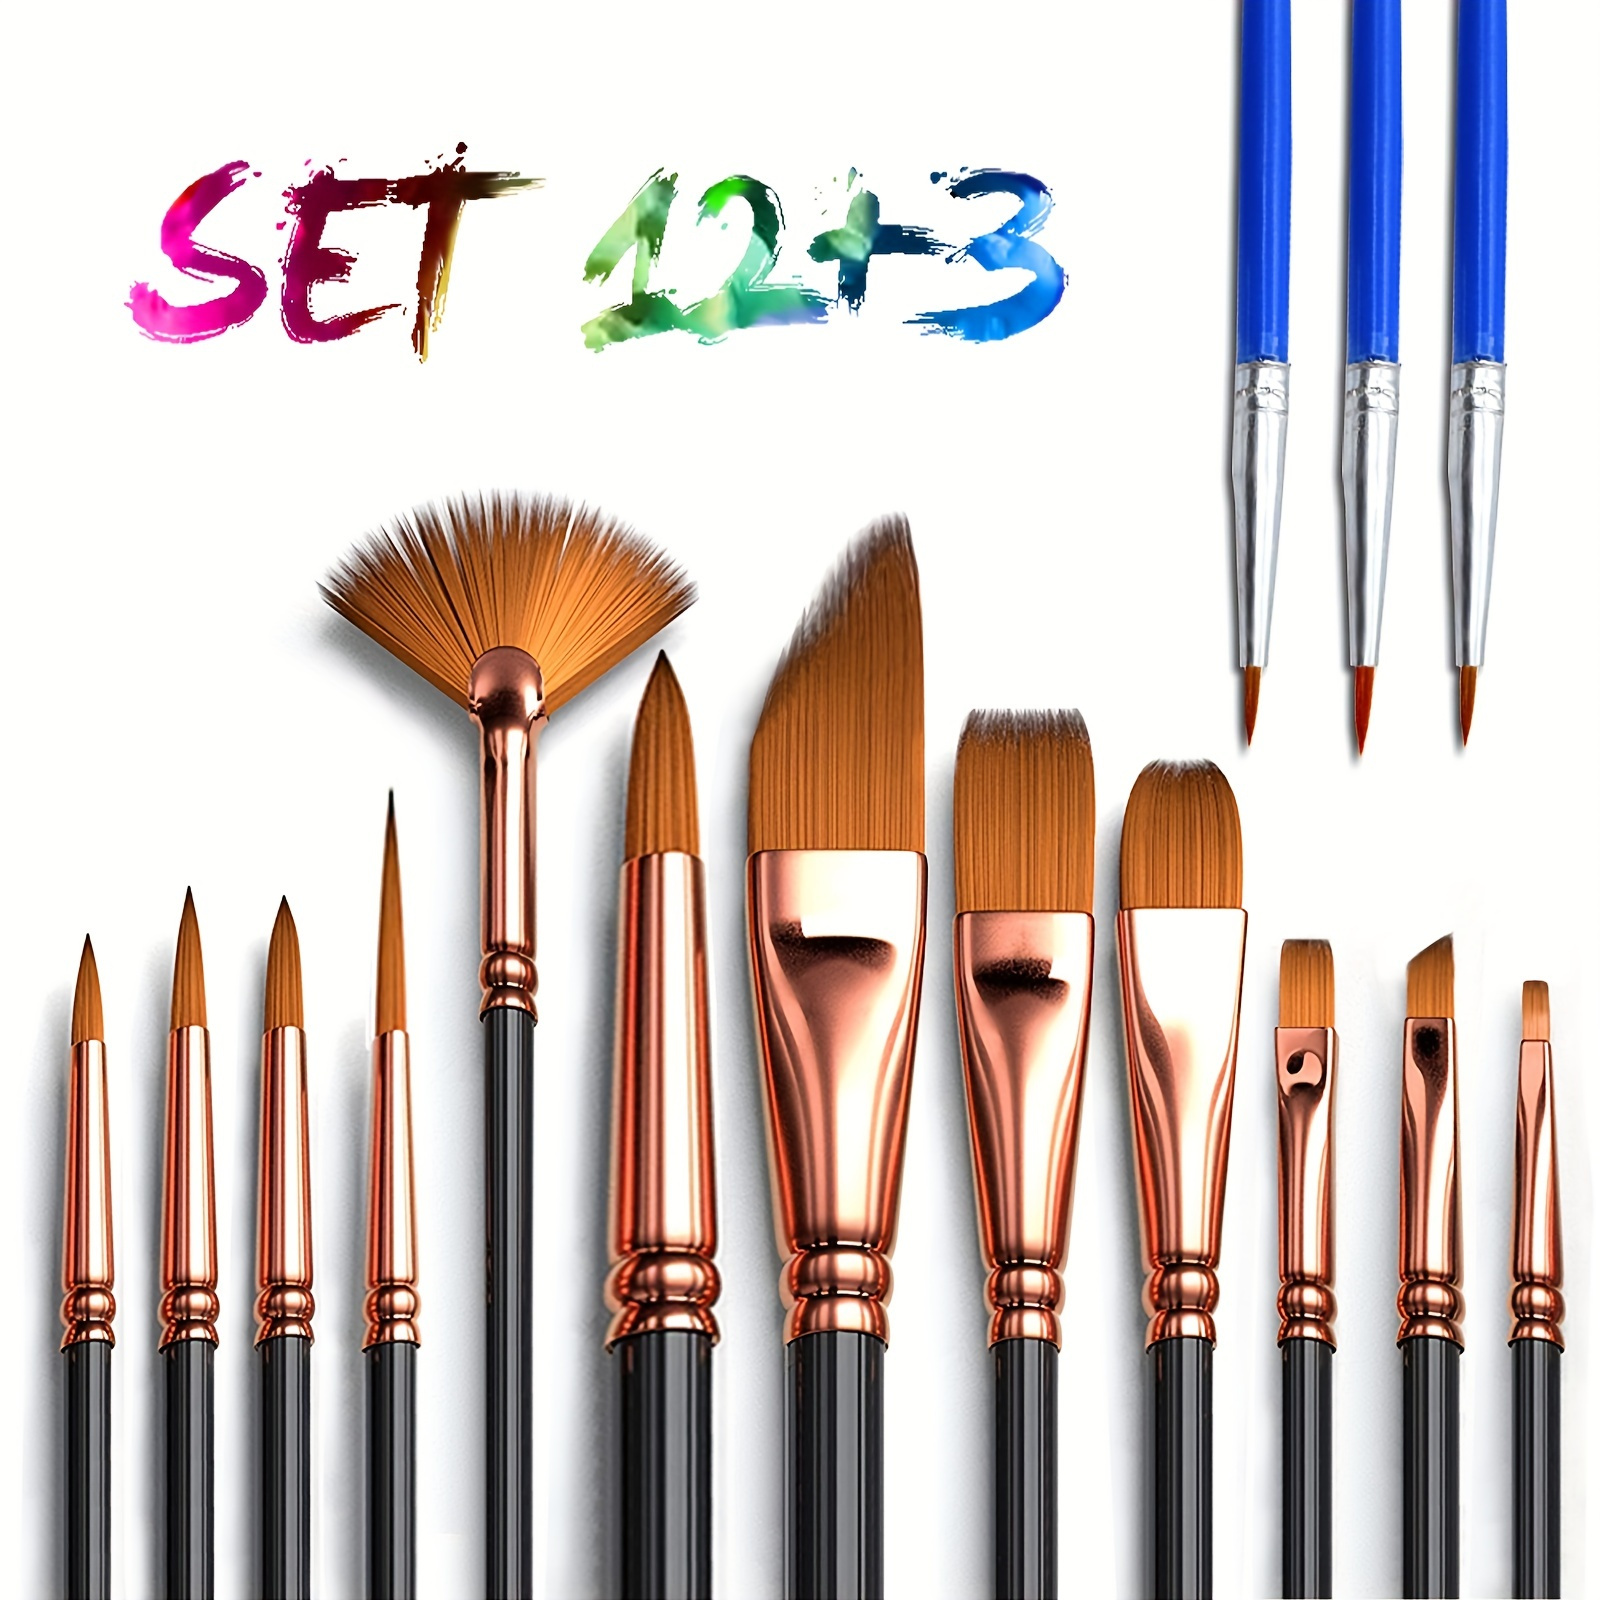 Miniature Model Paint Brush Set - 7 Pieces Fine Detail Painting Brushes for  Art Painting - Acrylic, Watercolor, Gouache, Oil - Airplane Kits, Ceramic